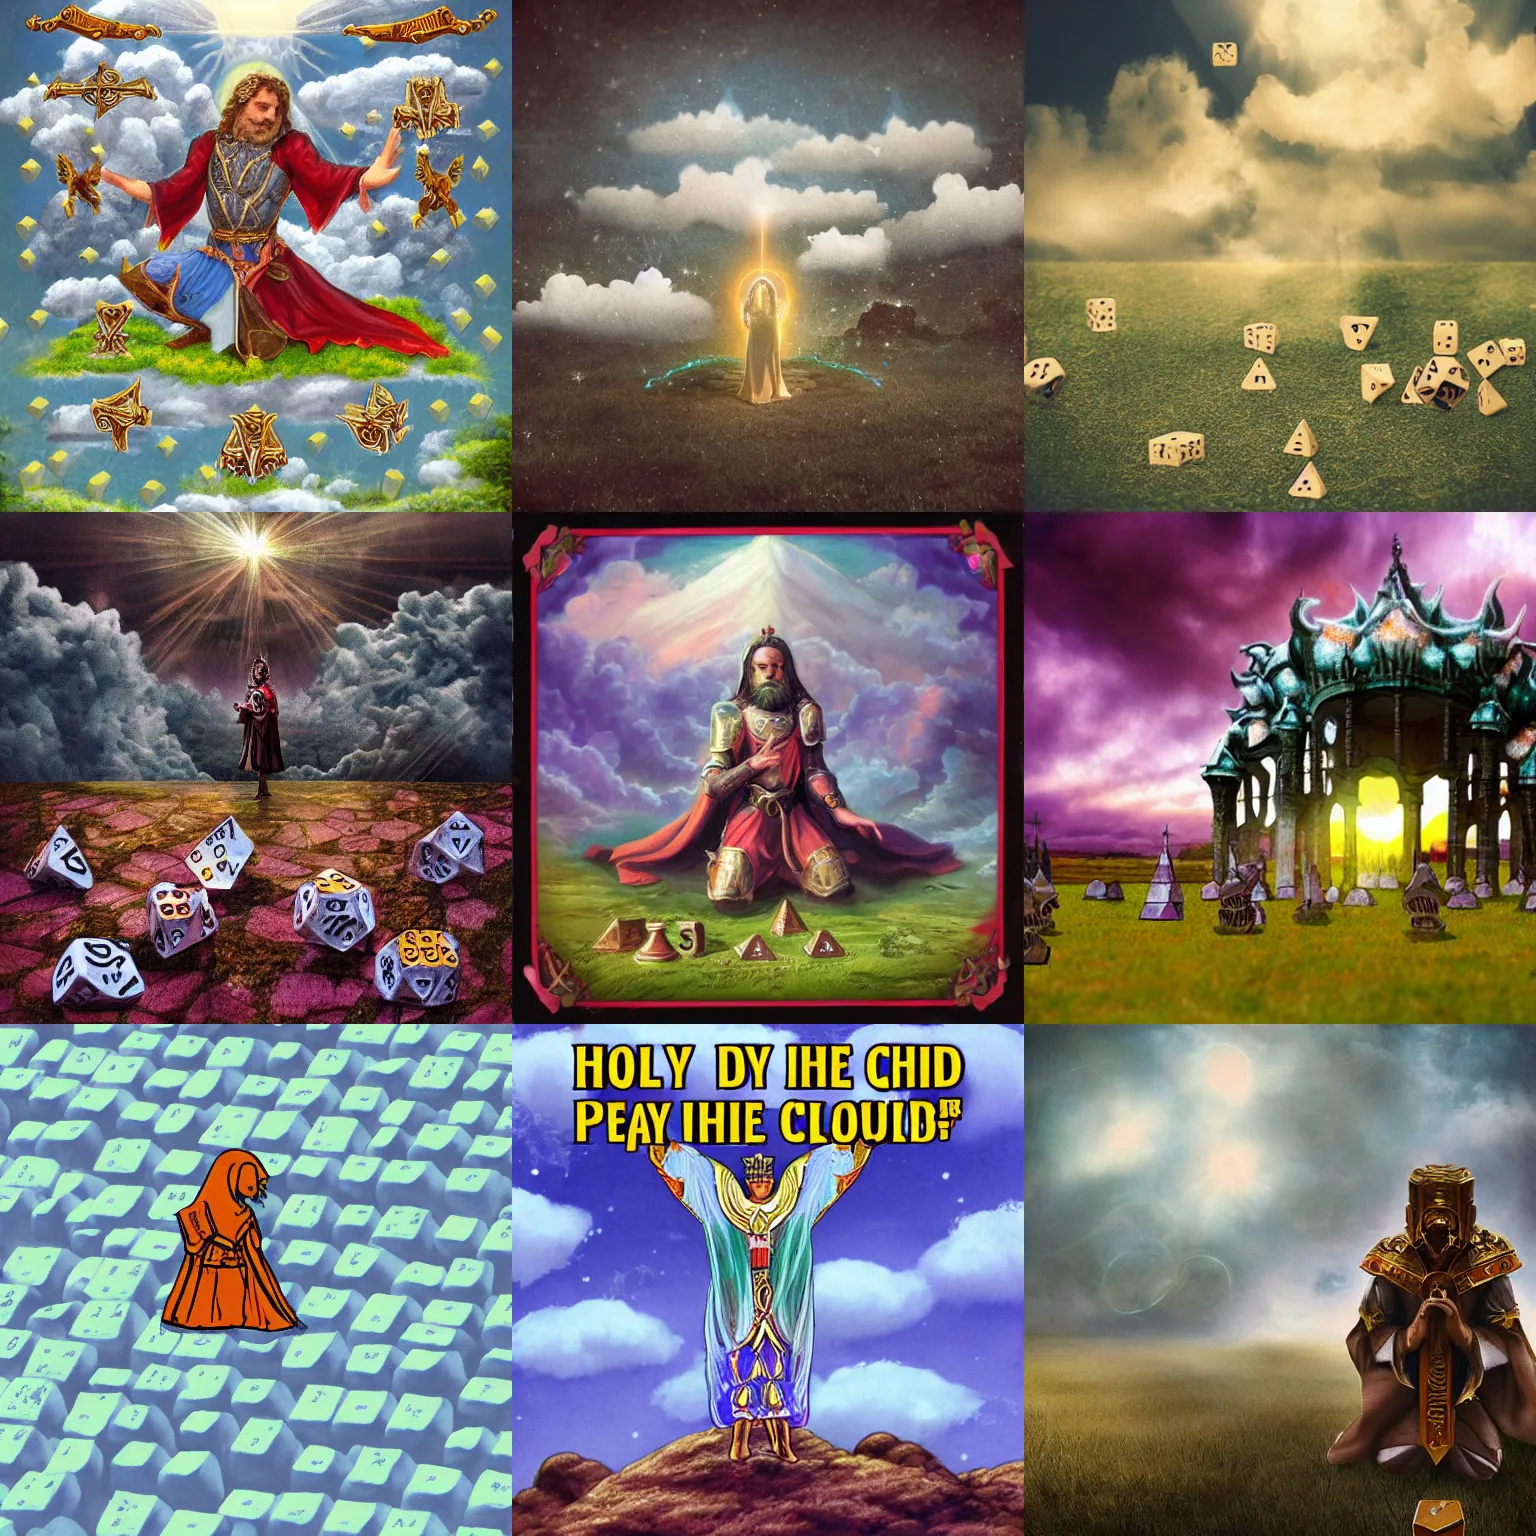 Prompt: holy dice in the clouds, on the ground are people dressed in fantasy armor, kneeling in prayer